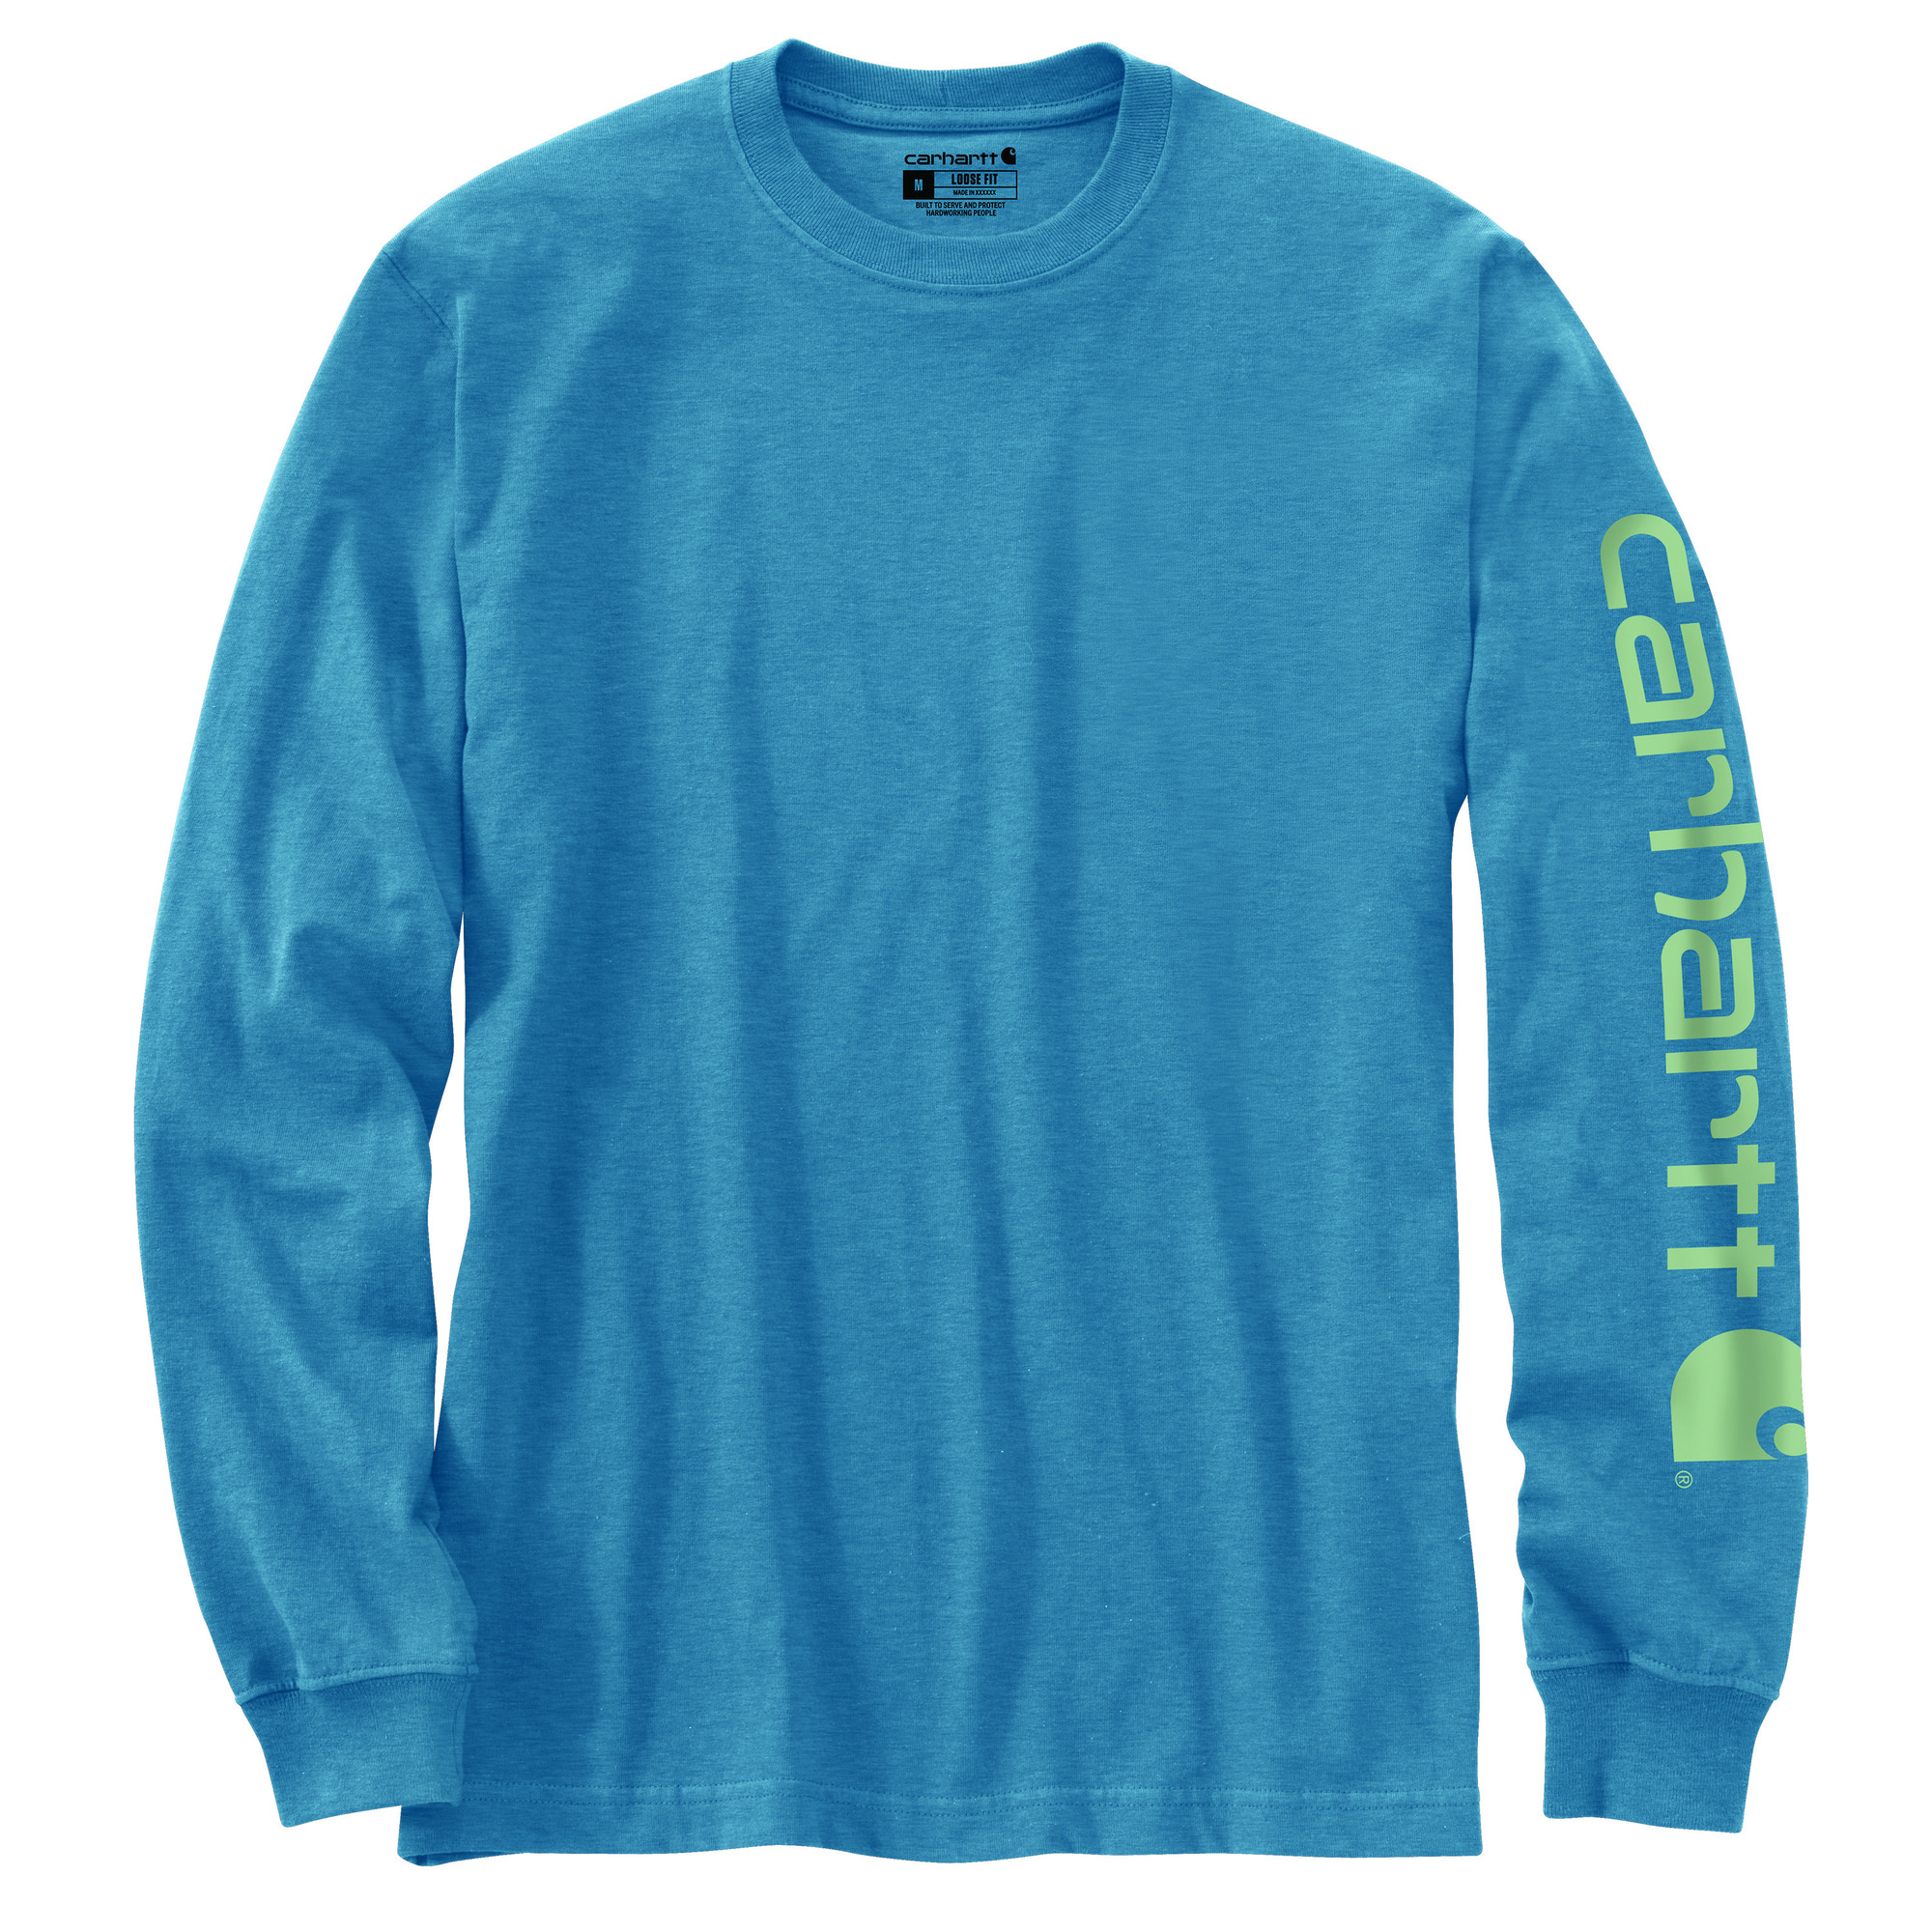 Carhartt, Men's Loose Fit Heavyweight Long Sleeve Graphic T-Shirt, Size L, Color Blue Lagoon Heather, Material 60% Cotton/40% Polyester, Model K231-